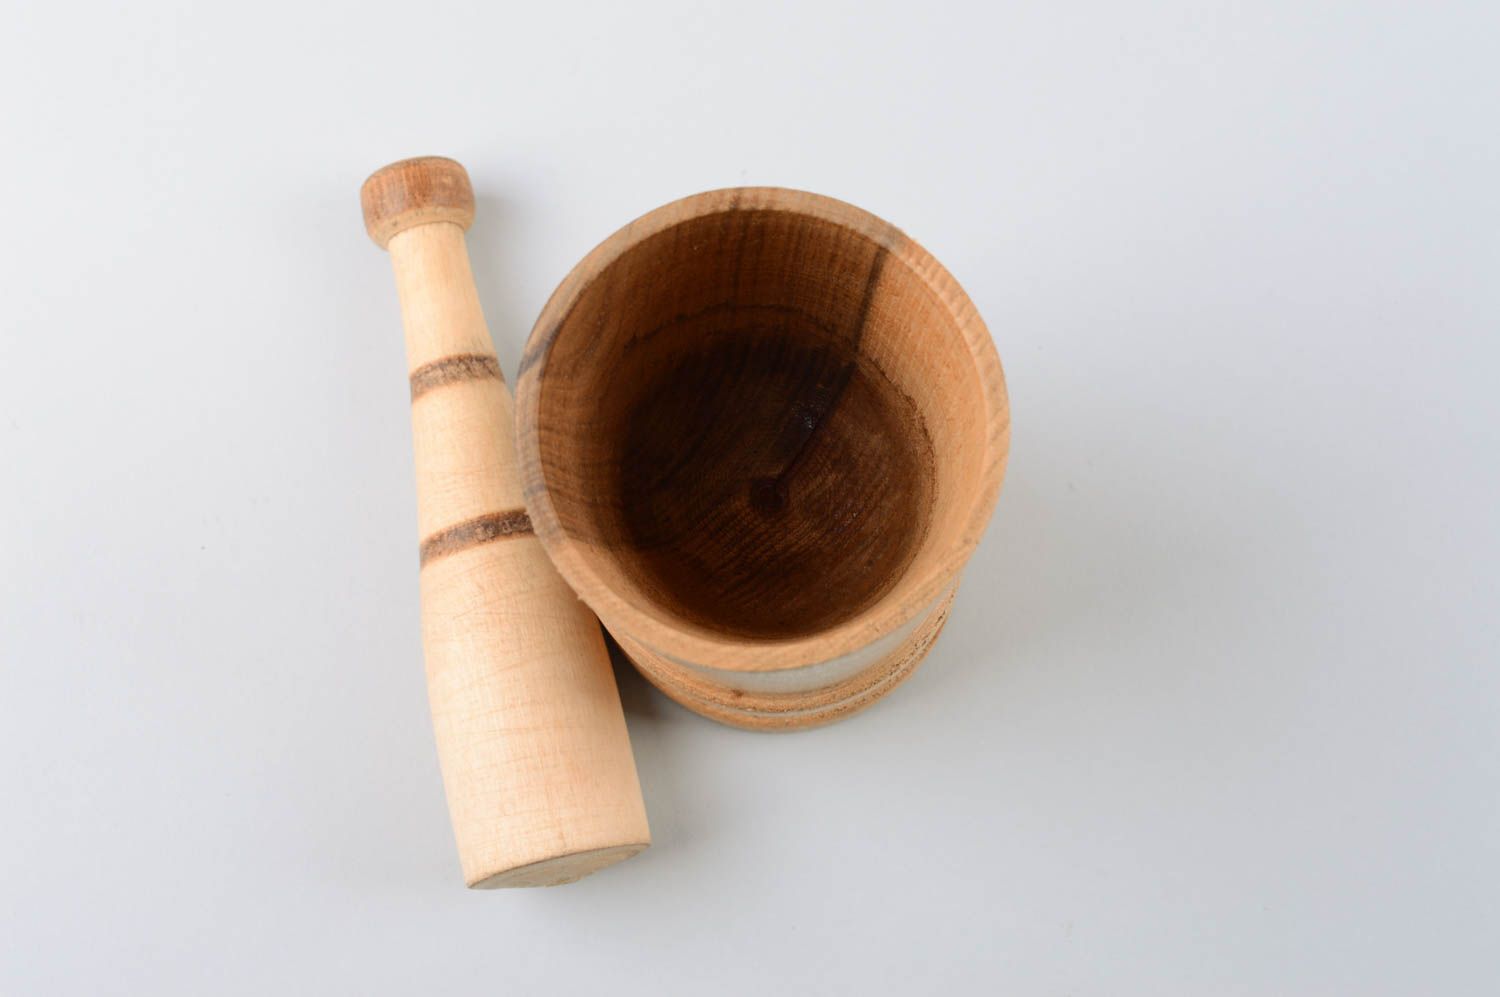 Handmade wooden mortar homemade mortar and pestle wooden kitchenware eco gifts photo 5